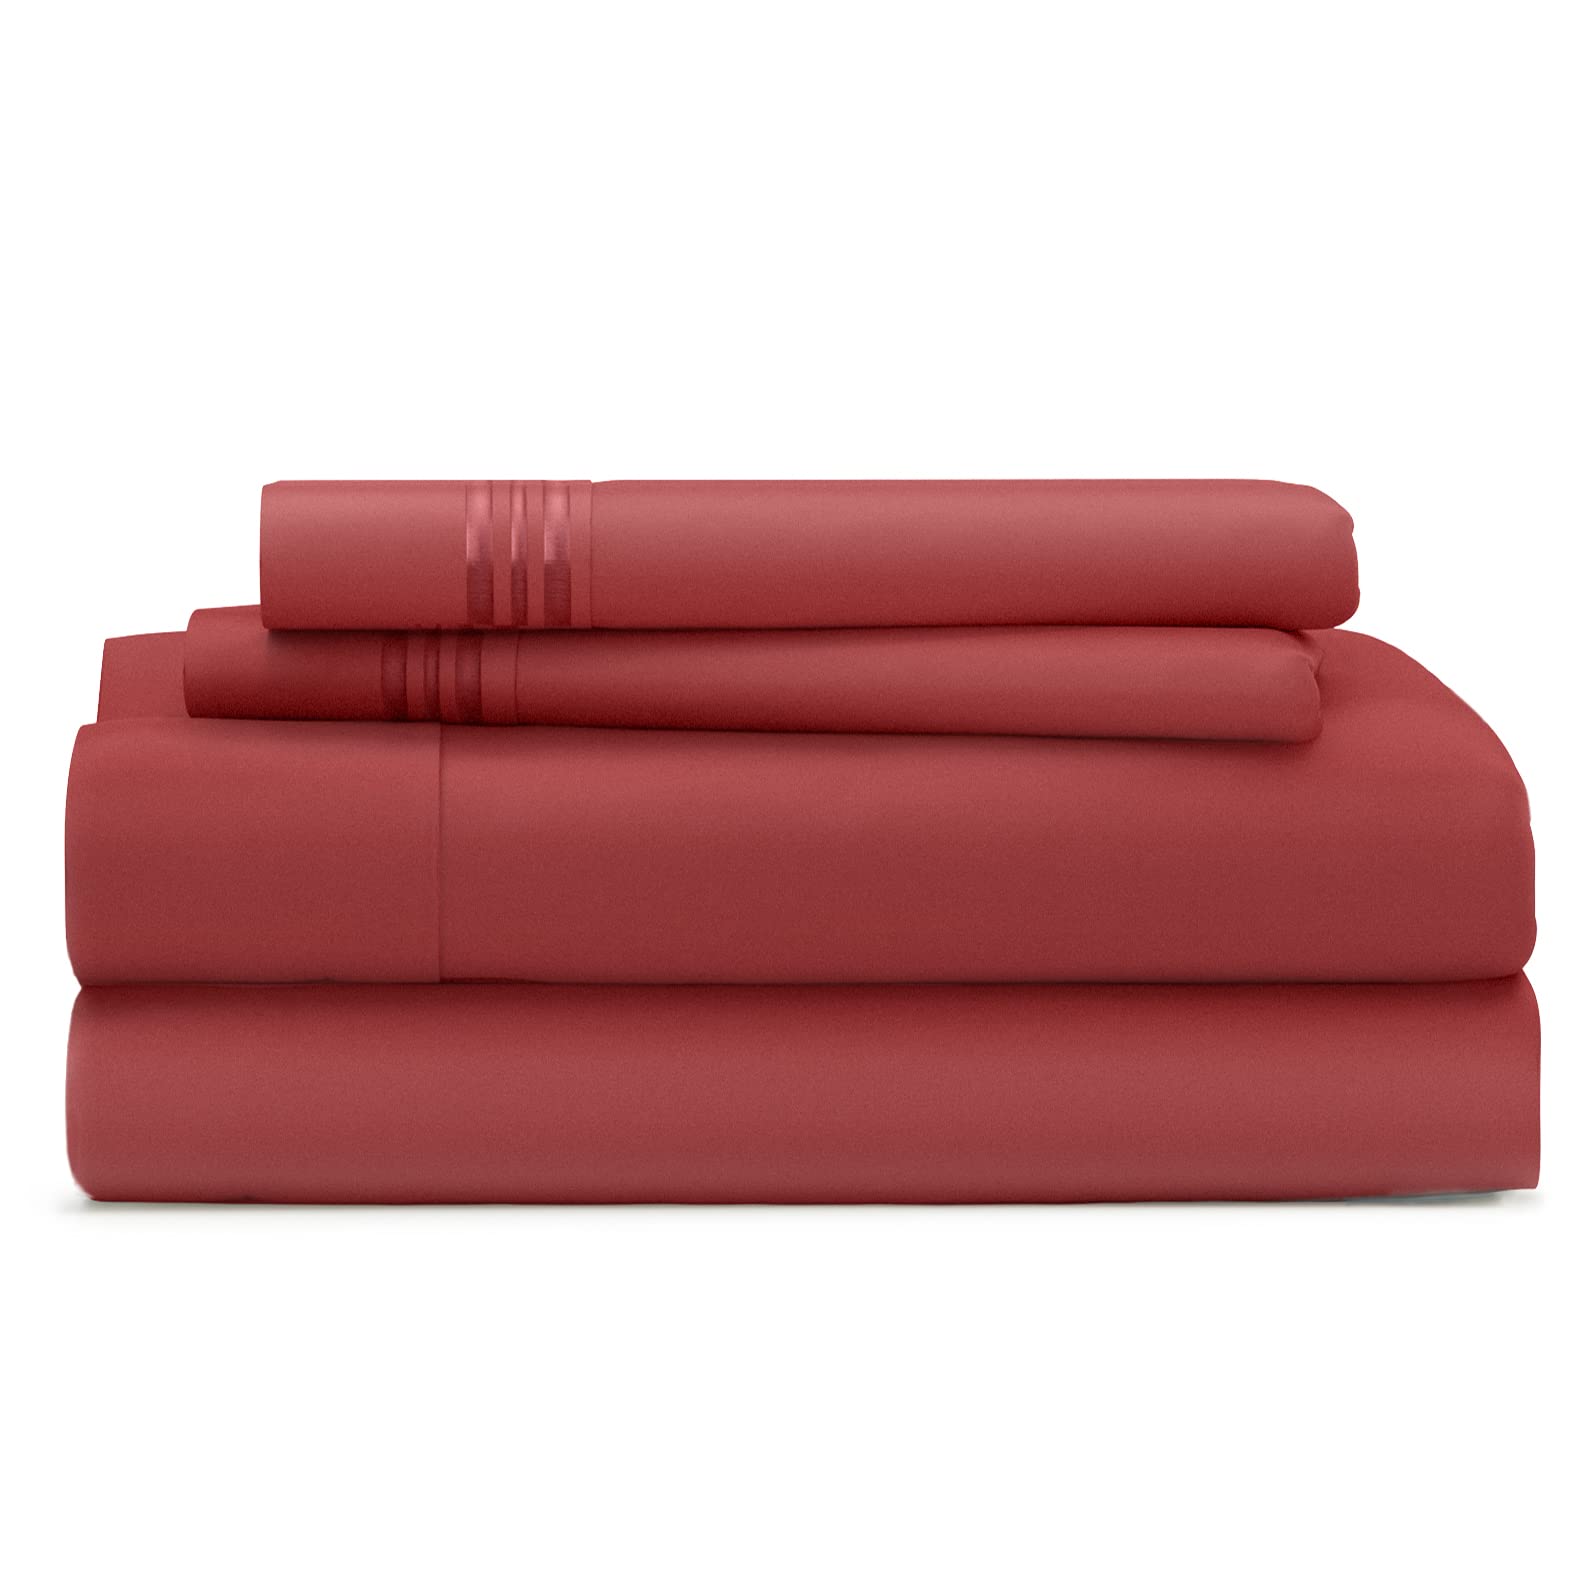 Book Cover Cosy House Collection Everyday 1500 Series Bed Sheets - Bedroom Essentials - Luxury Hotel Ultra Soft Bedding - Stain & Wrinkle Resistant - Easy & Comfy Fit - 4 Piece (Queen, Burgundy) Queen Burgundy